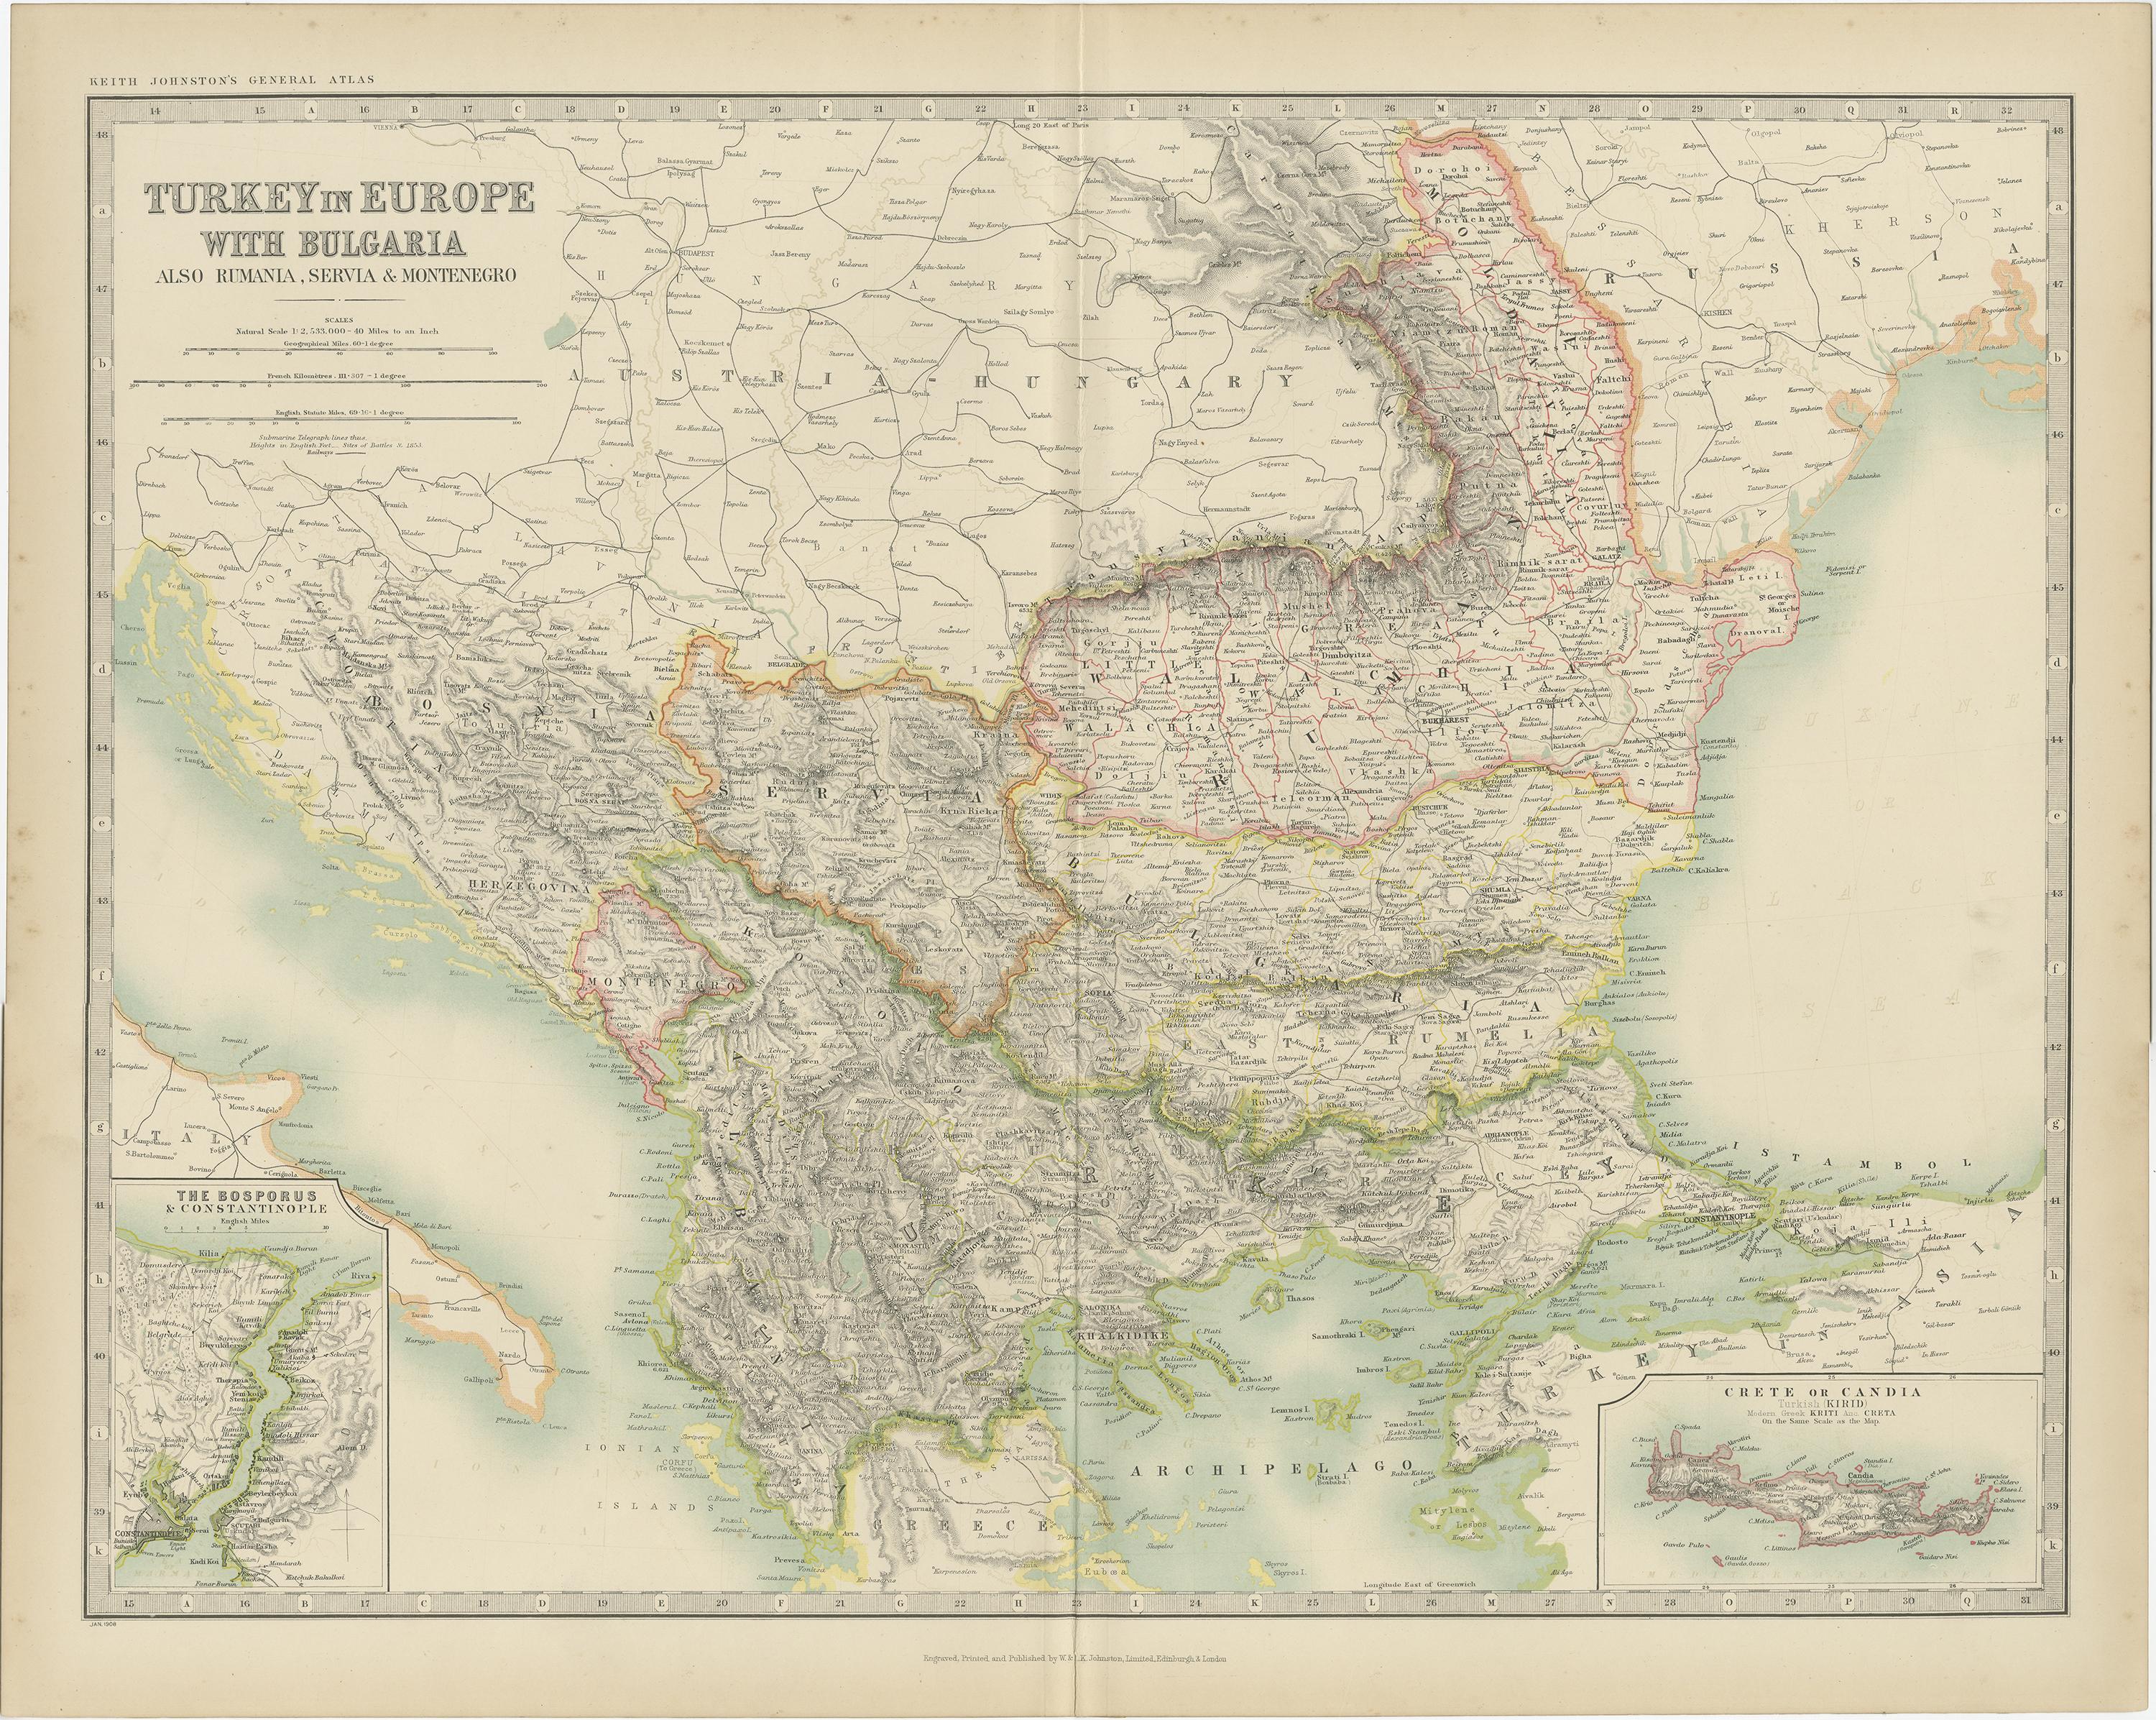 Antique map titled 'Turkey in Europe with Bulgaria'. Original antique map of Turkey in Europe with Bulgaria. With inset maps of The Bosporus & Constantinople, and Crete (or Candia). This map originates from the ‘Royal Atlas of Modern Geography’.